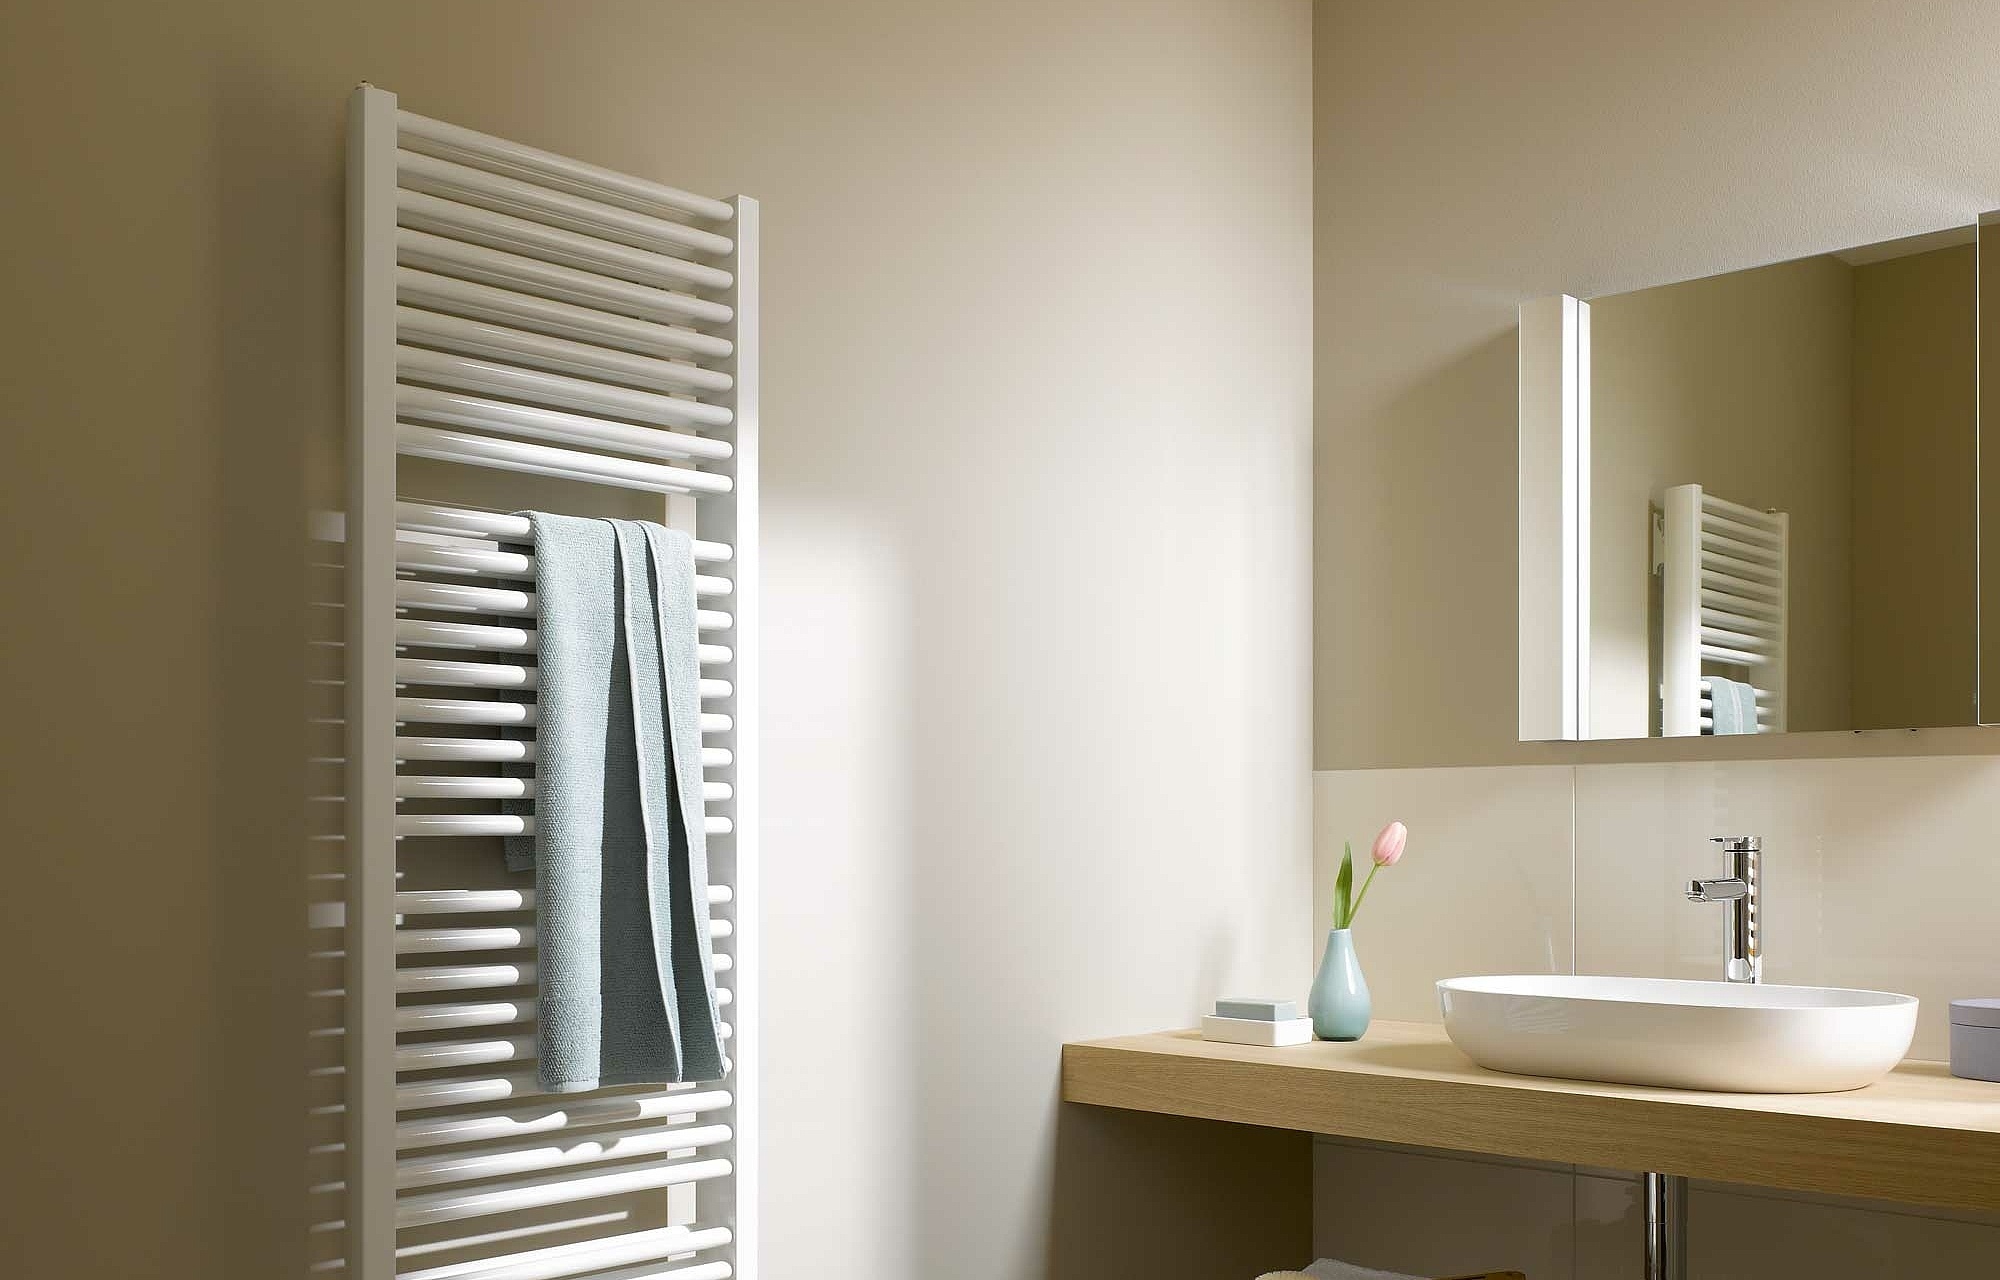 Kermi Duett design and bathroom radiators are available in a wide range of sizes and many different colour options.